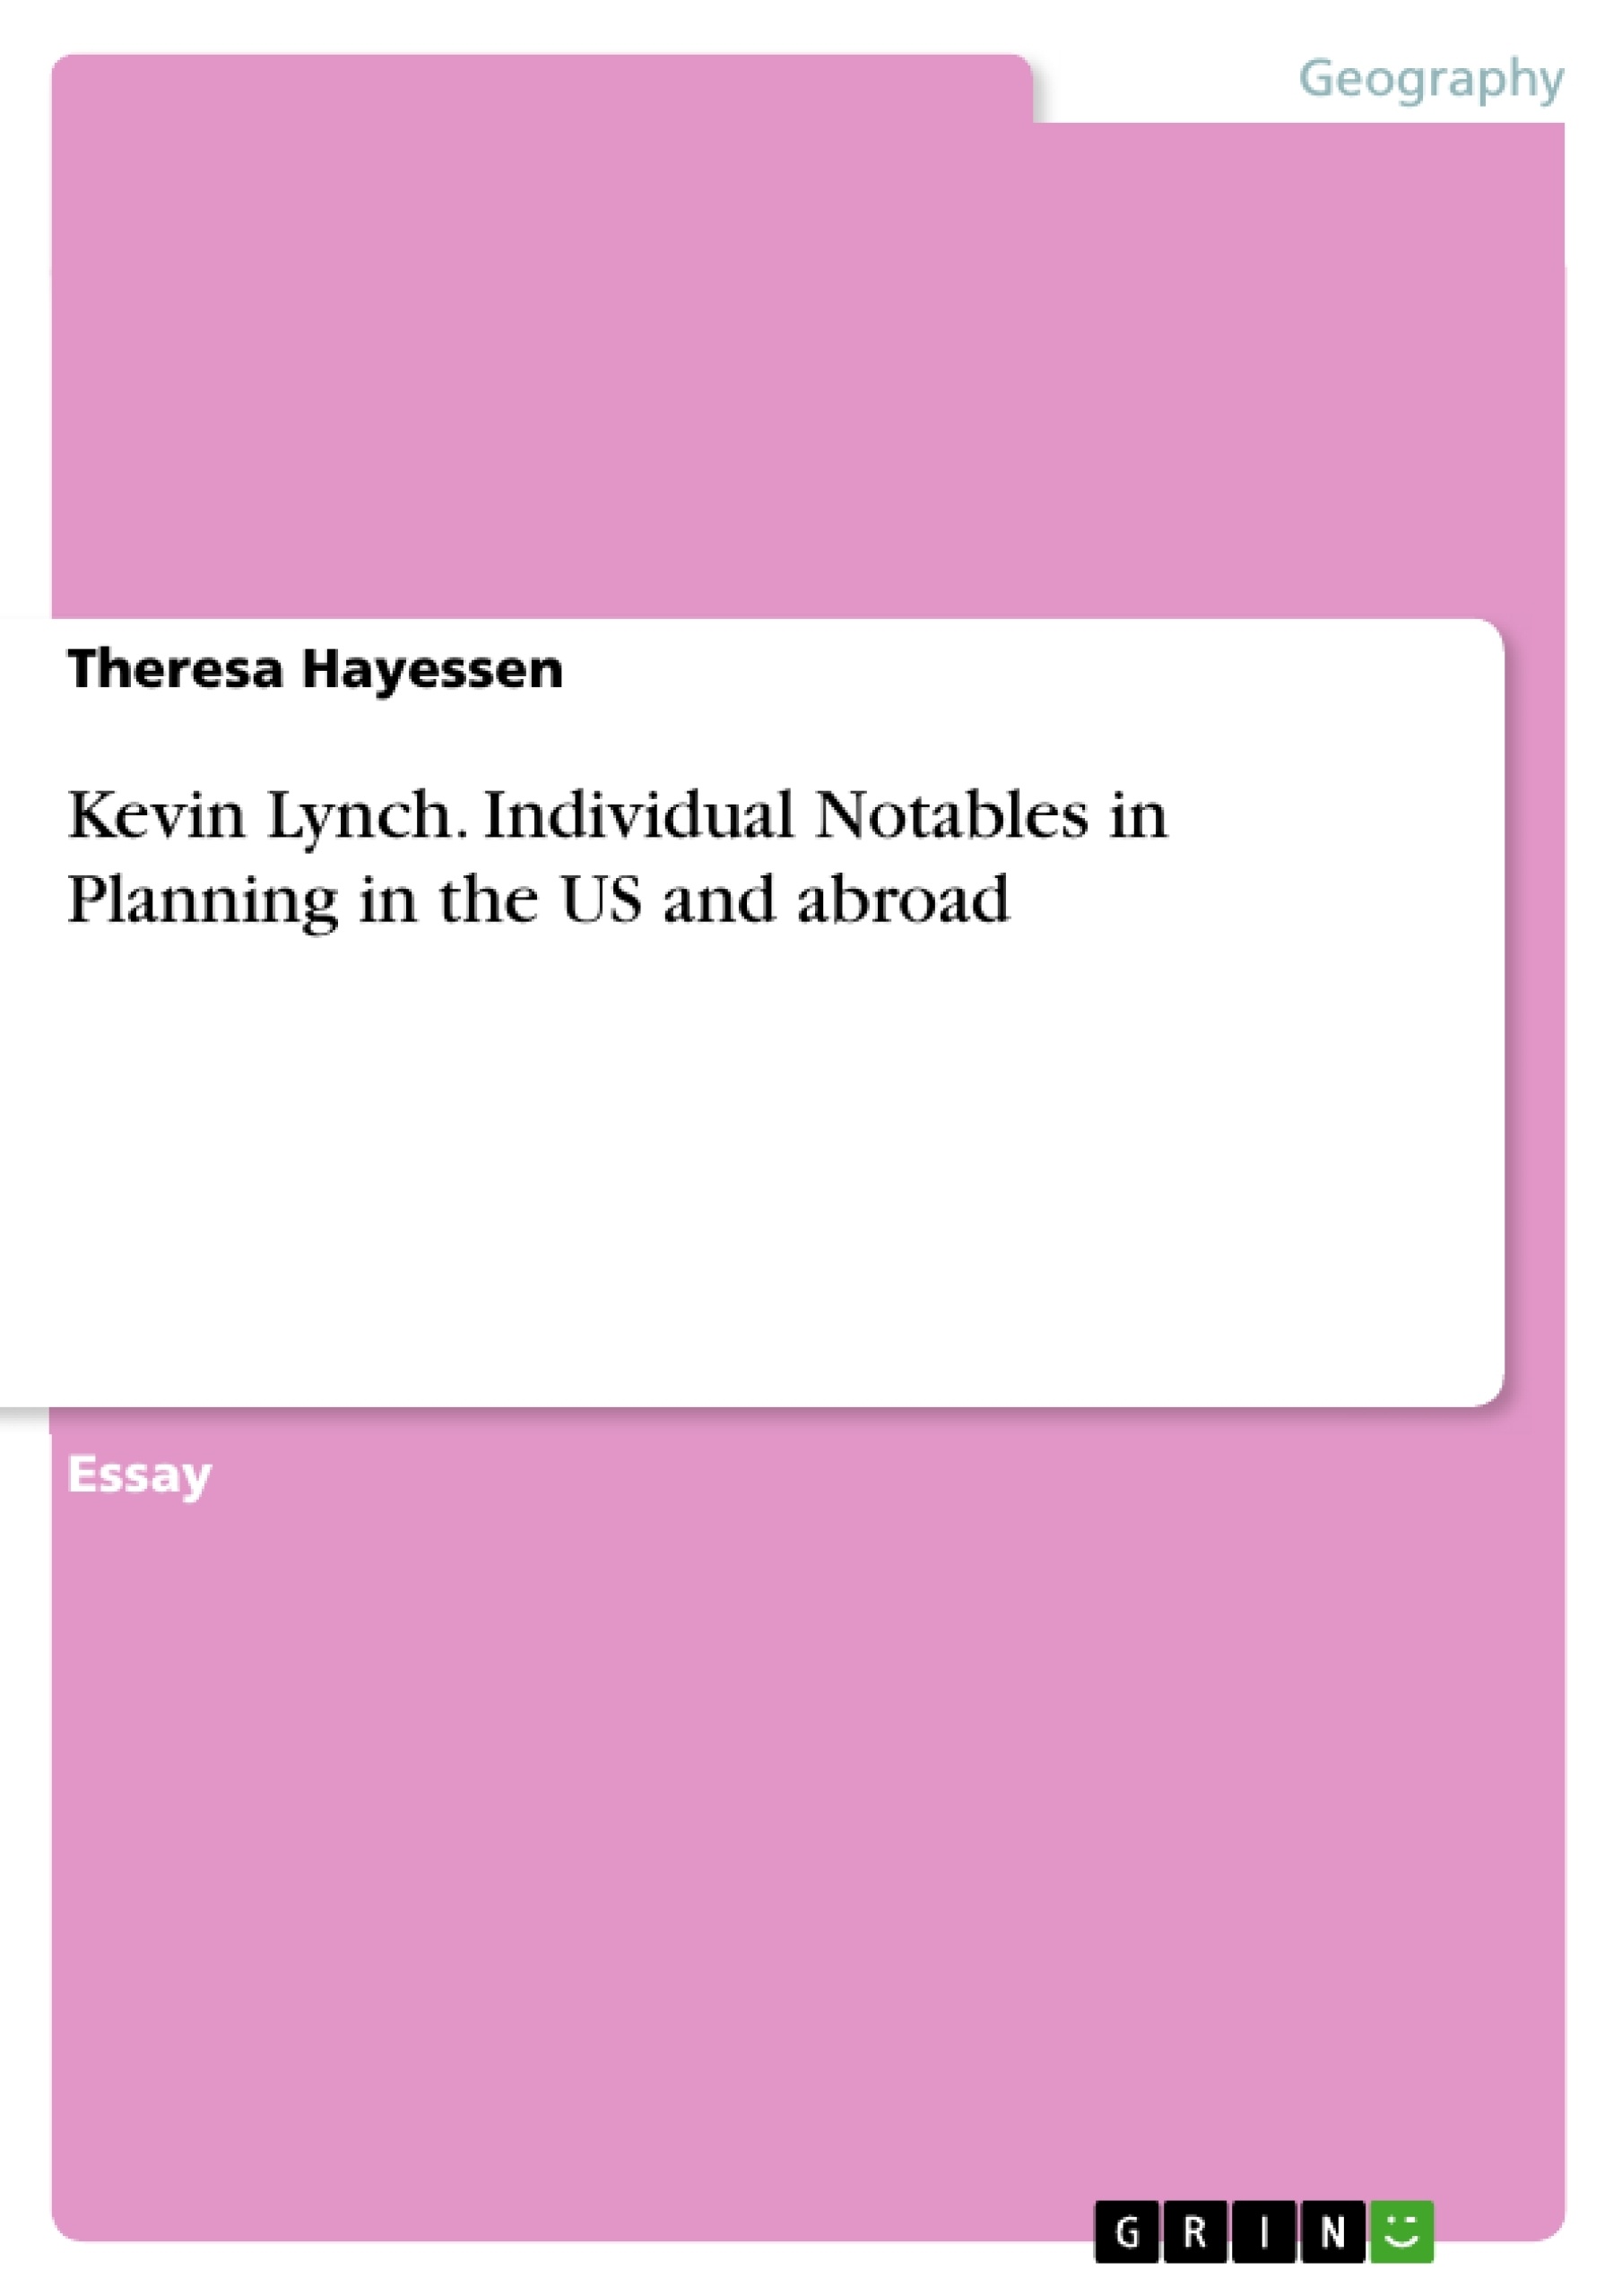 Title: Kevin Lynch. Individual Notables in Planning 
in the US and abroad